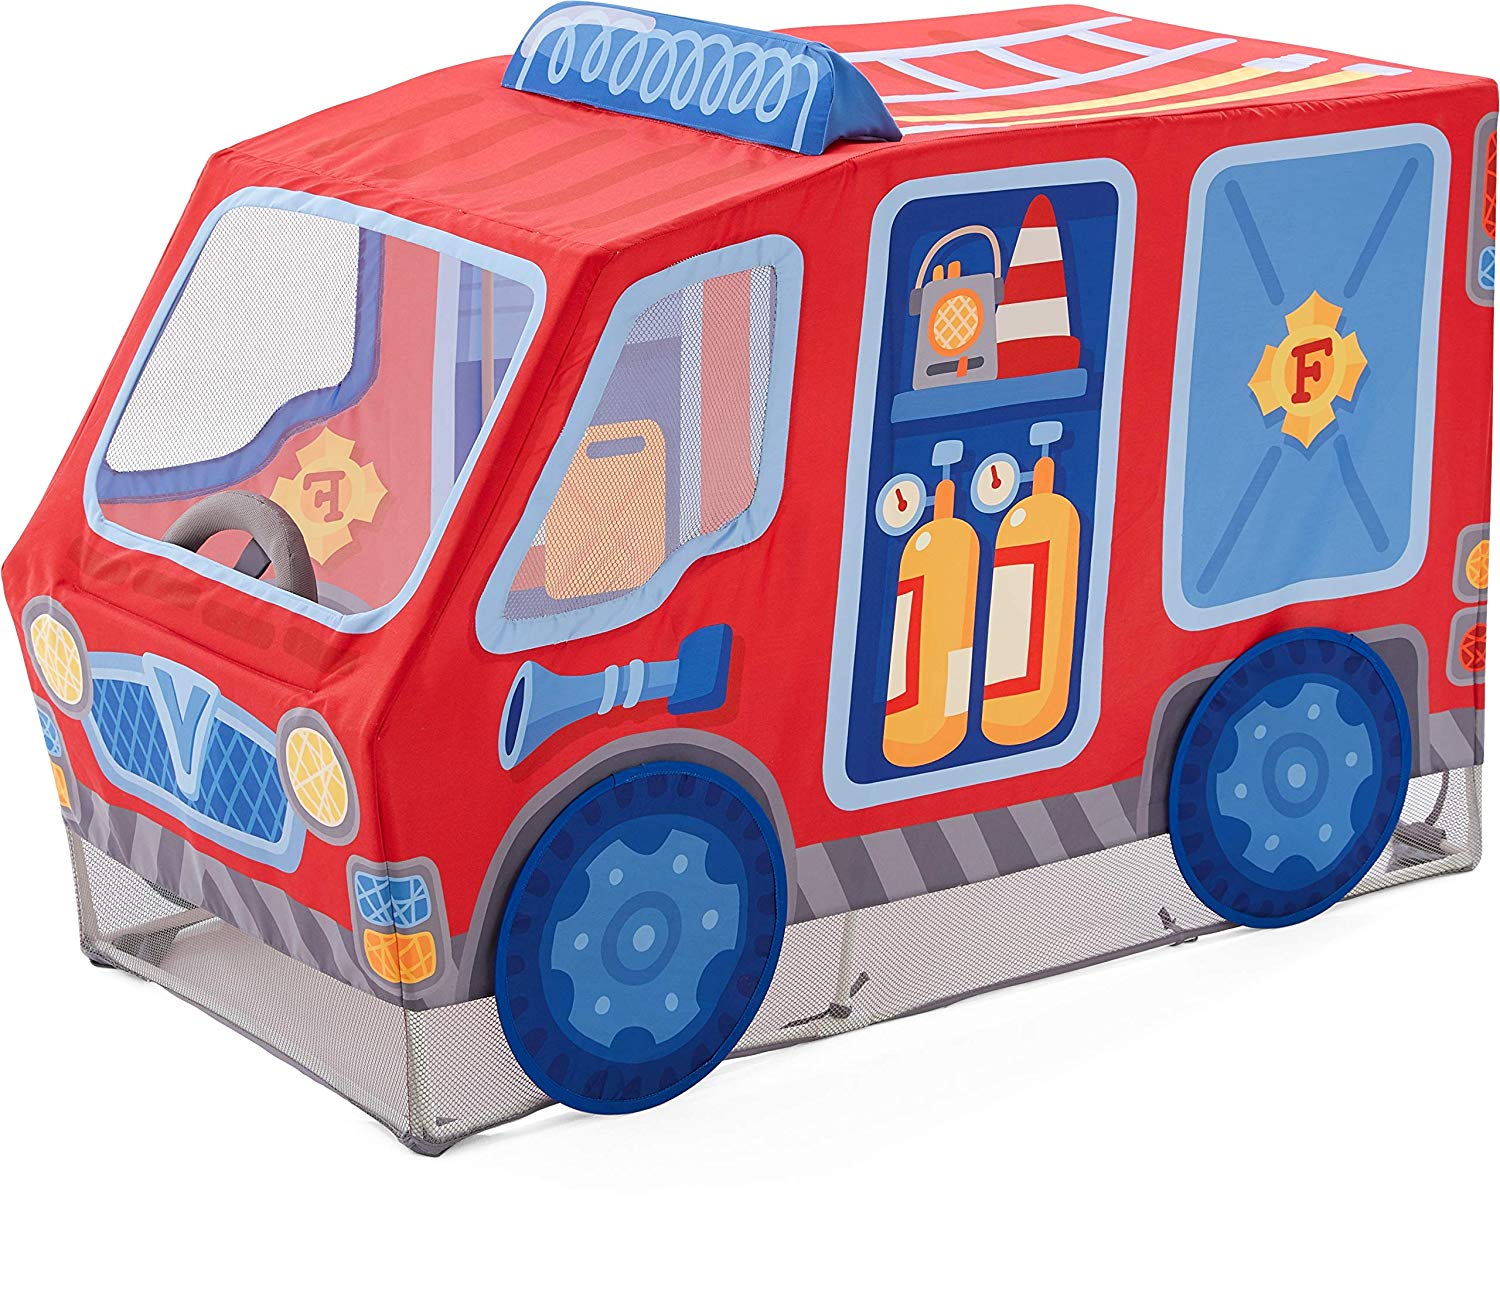 Haba 304210 Fire Brigade Play Tent